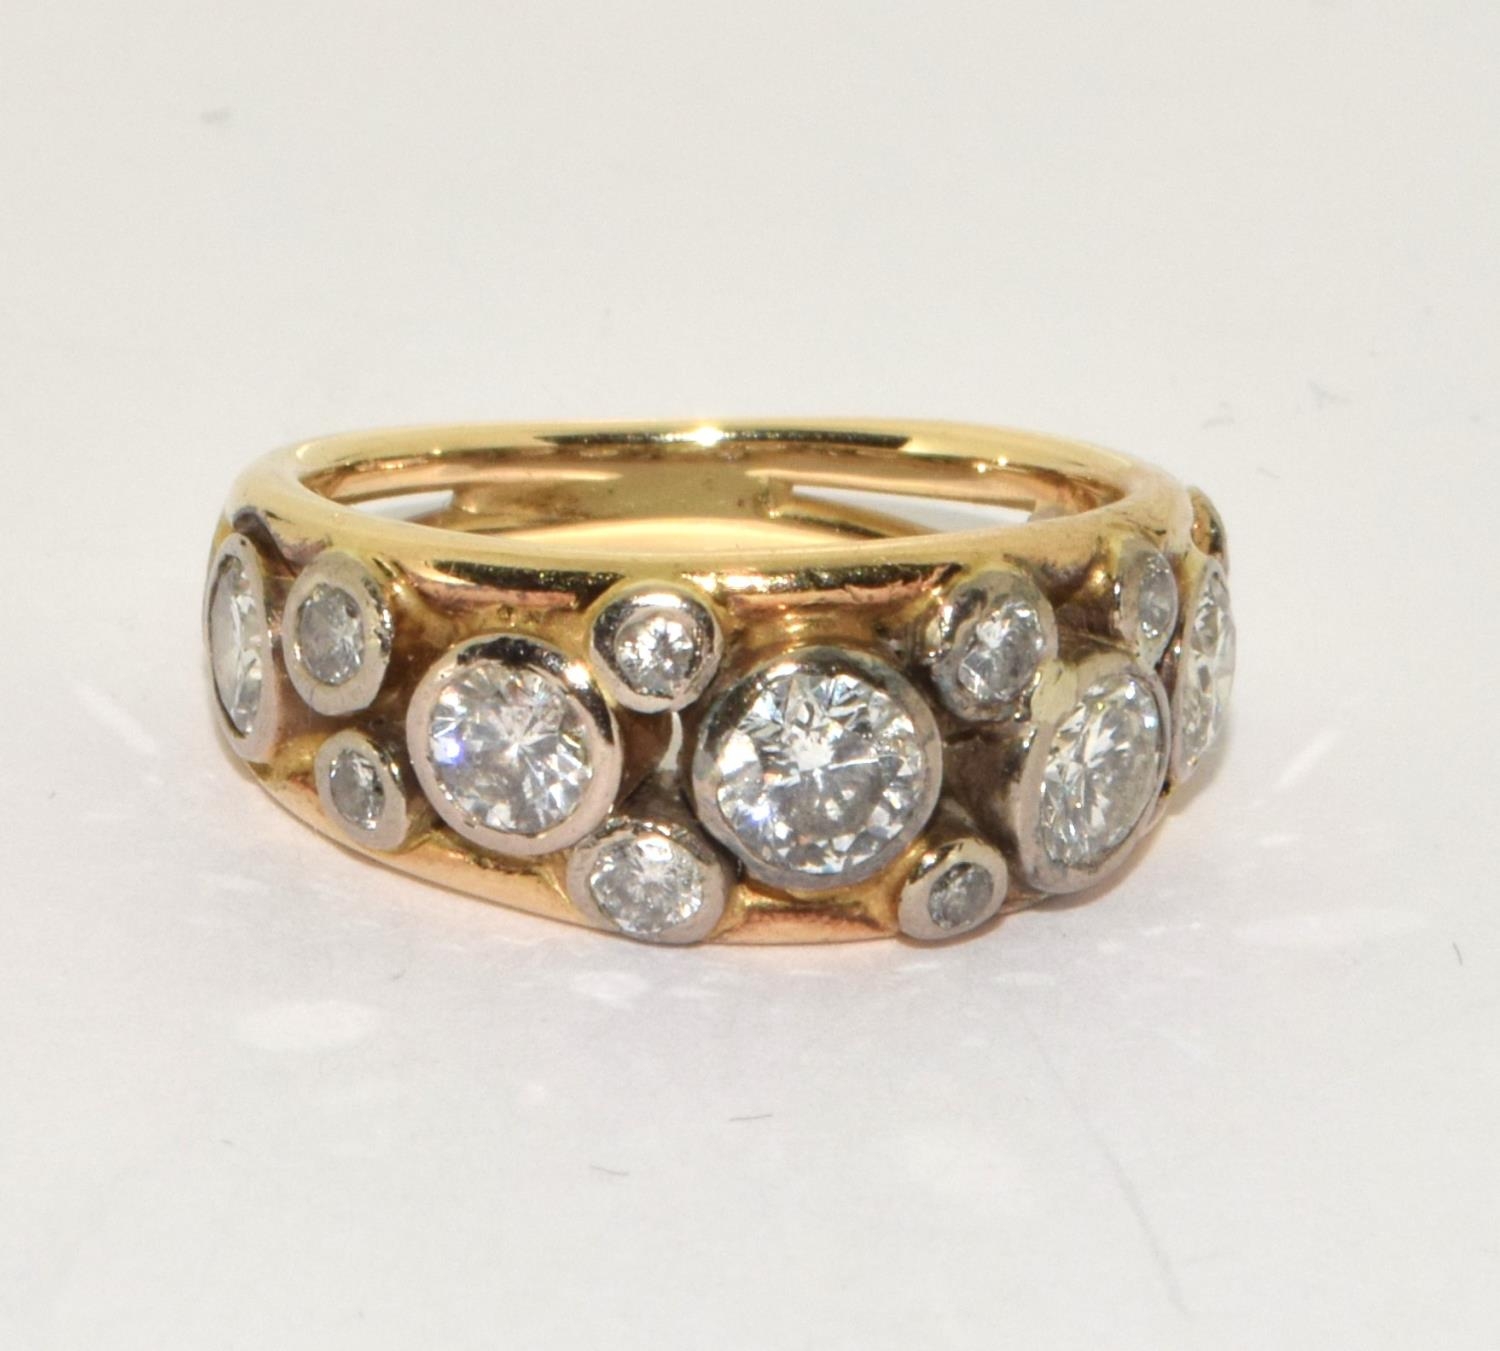 9ct gold ladies vintage Multiple Diamond ring of approx 1.5ct size N